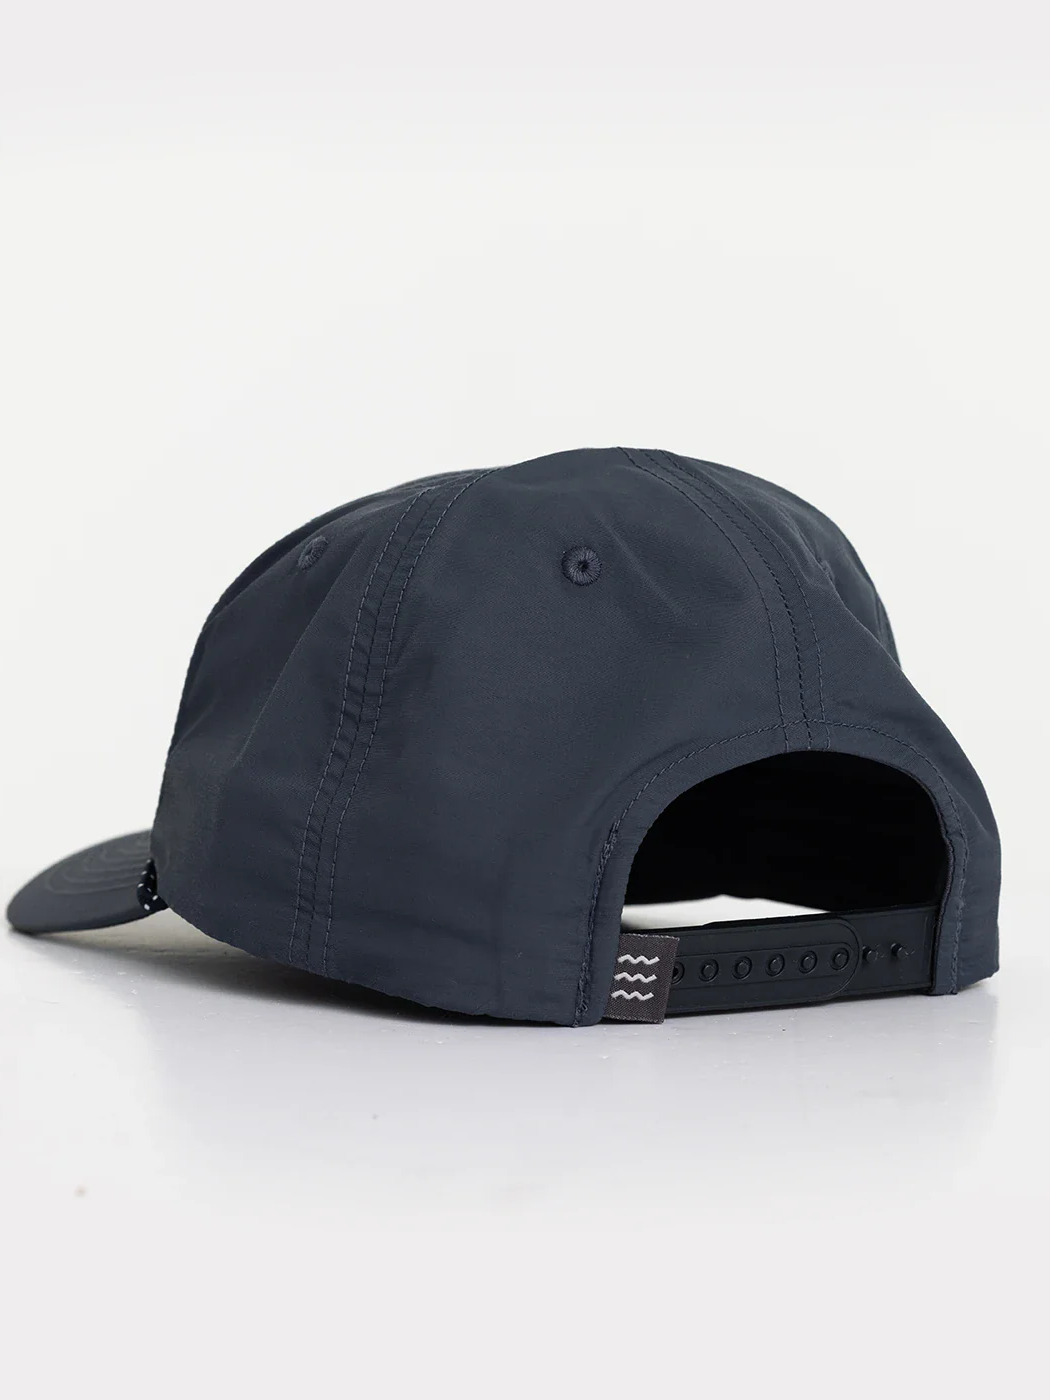 Free Fly: Wave 5-Panel Hat